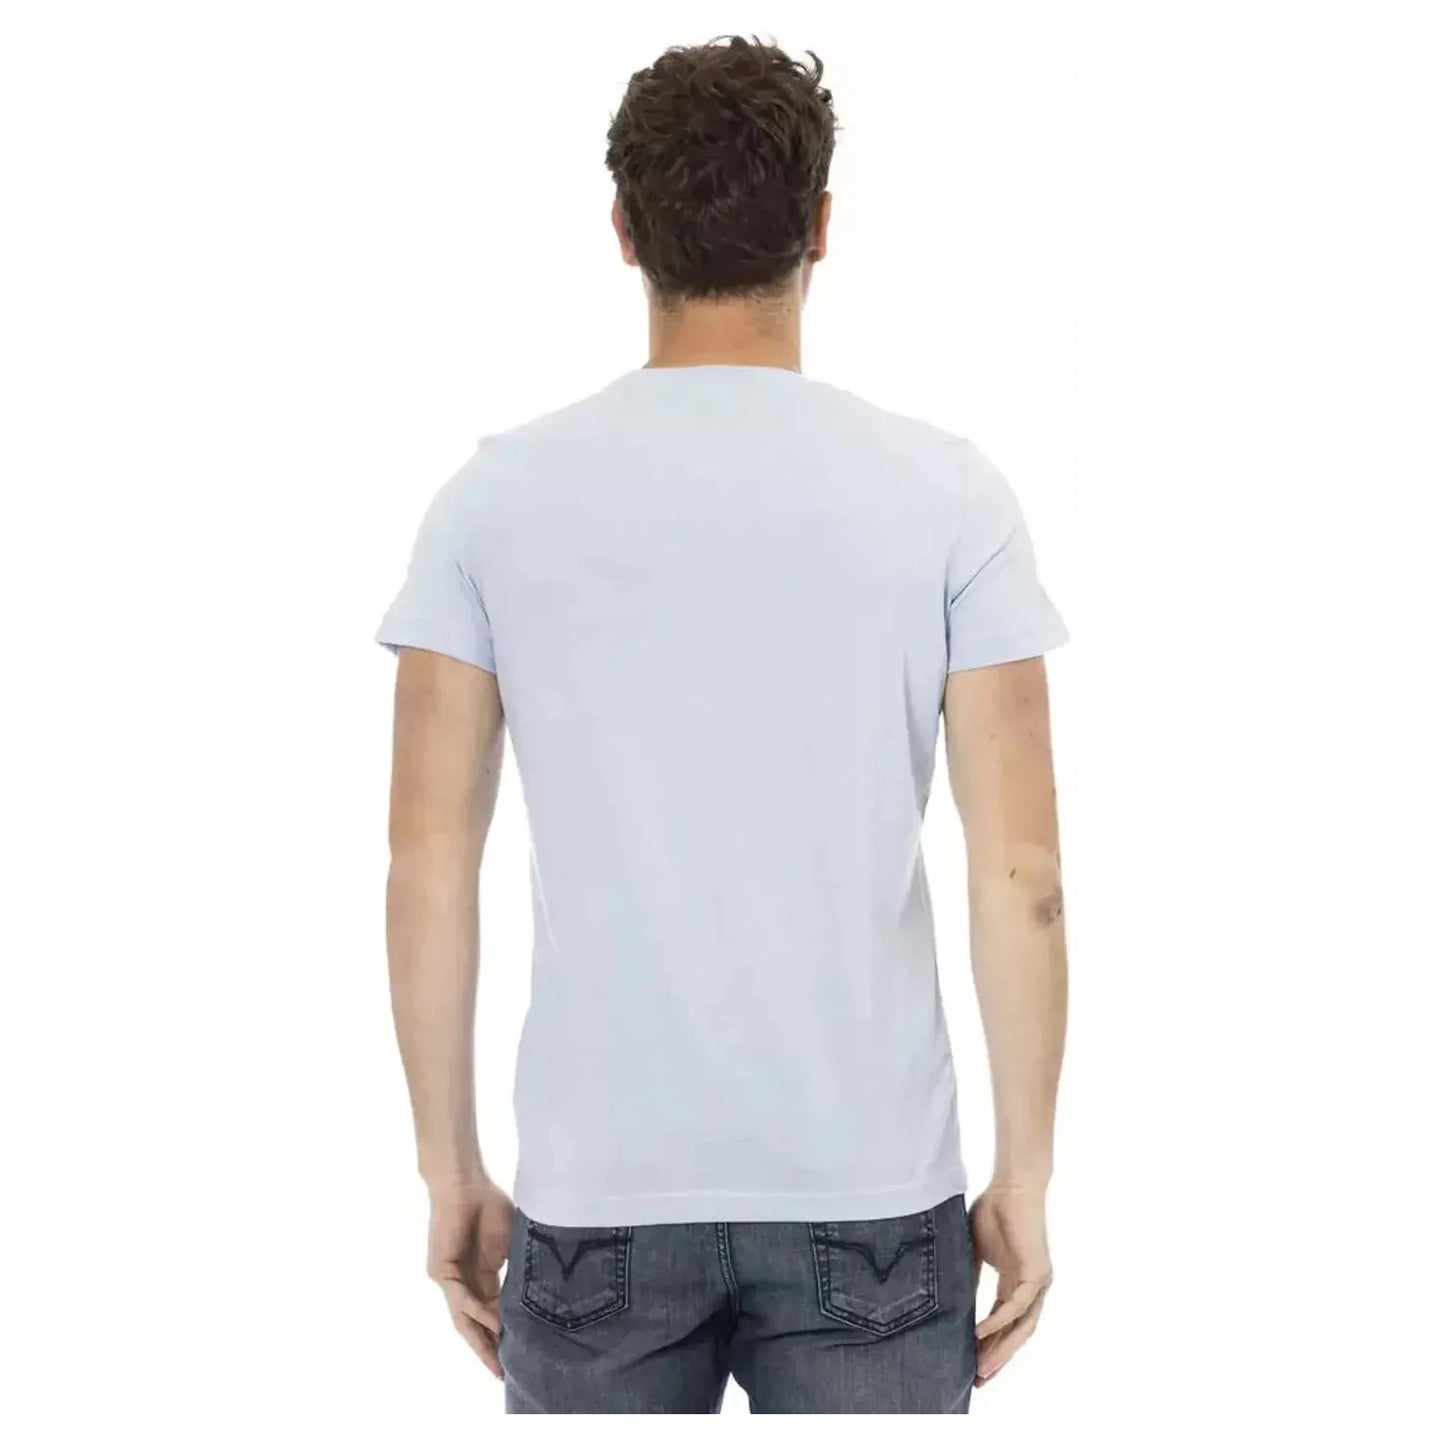 Trussardi Action Elevated Casual Light Blue Tee for Men light-blue-cotton-t-shirt-13